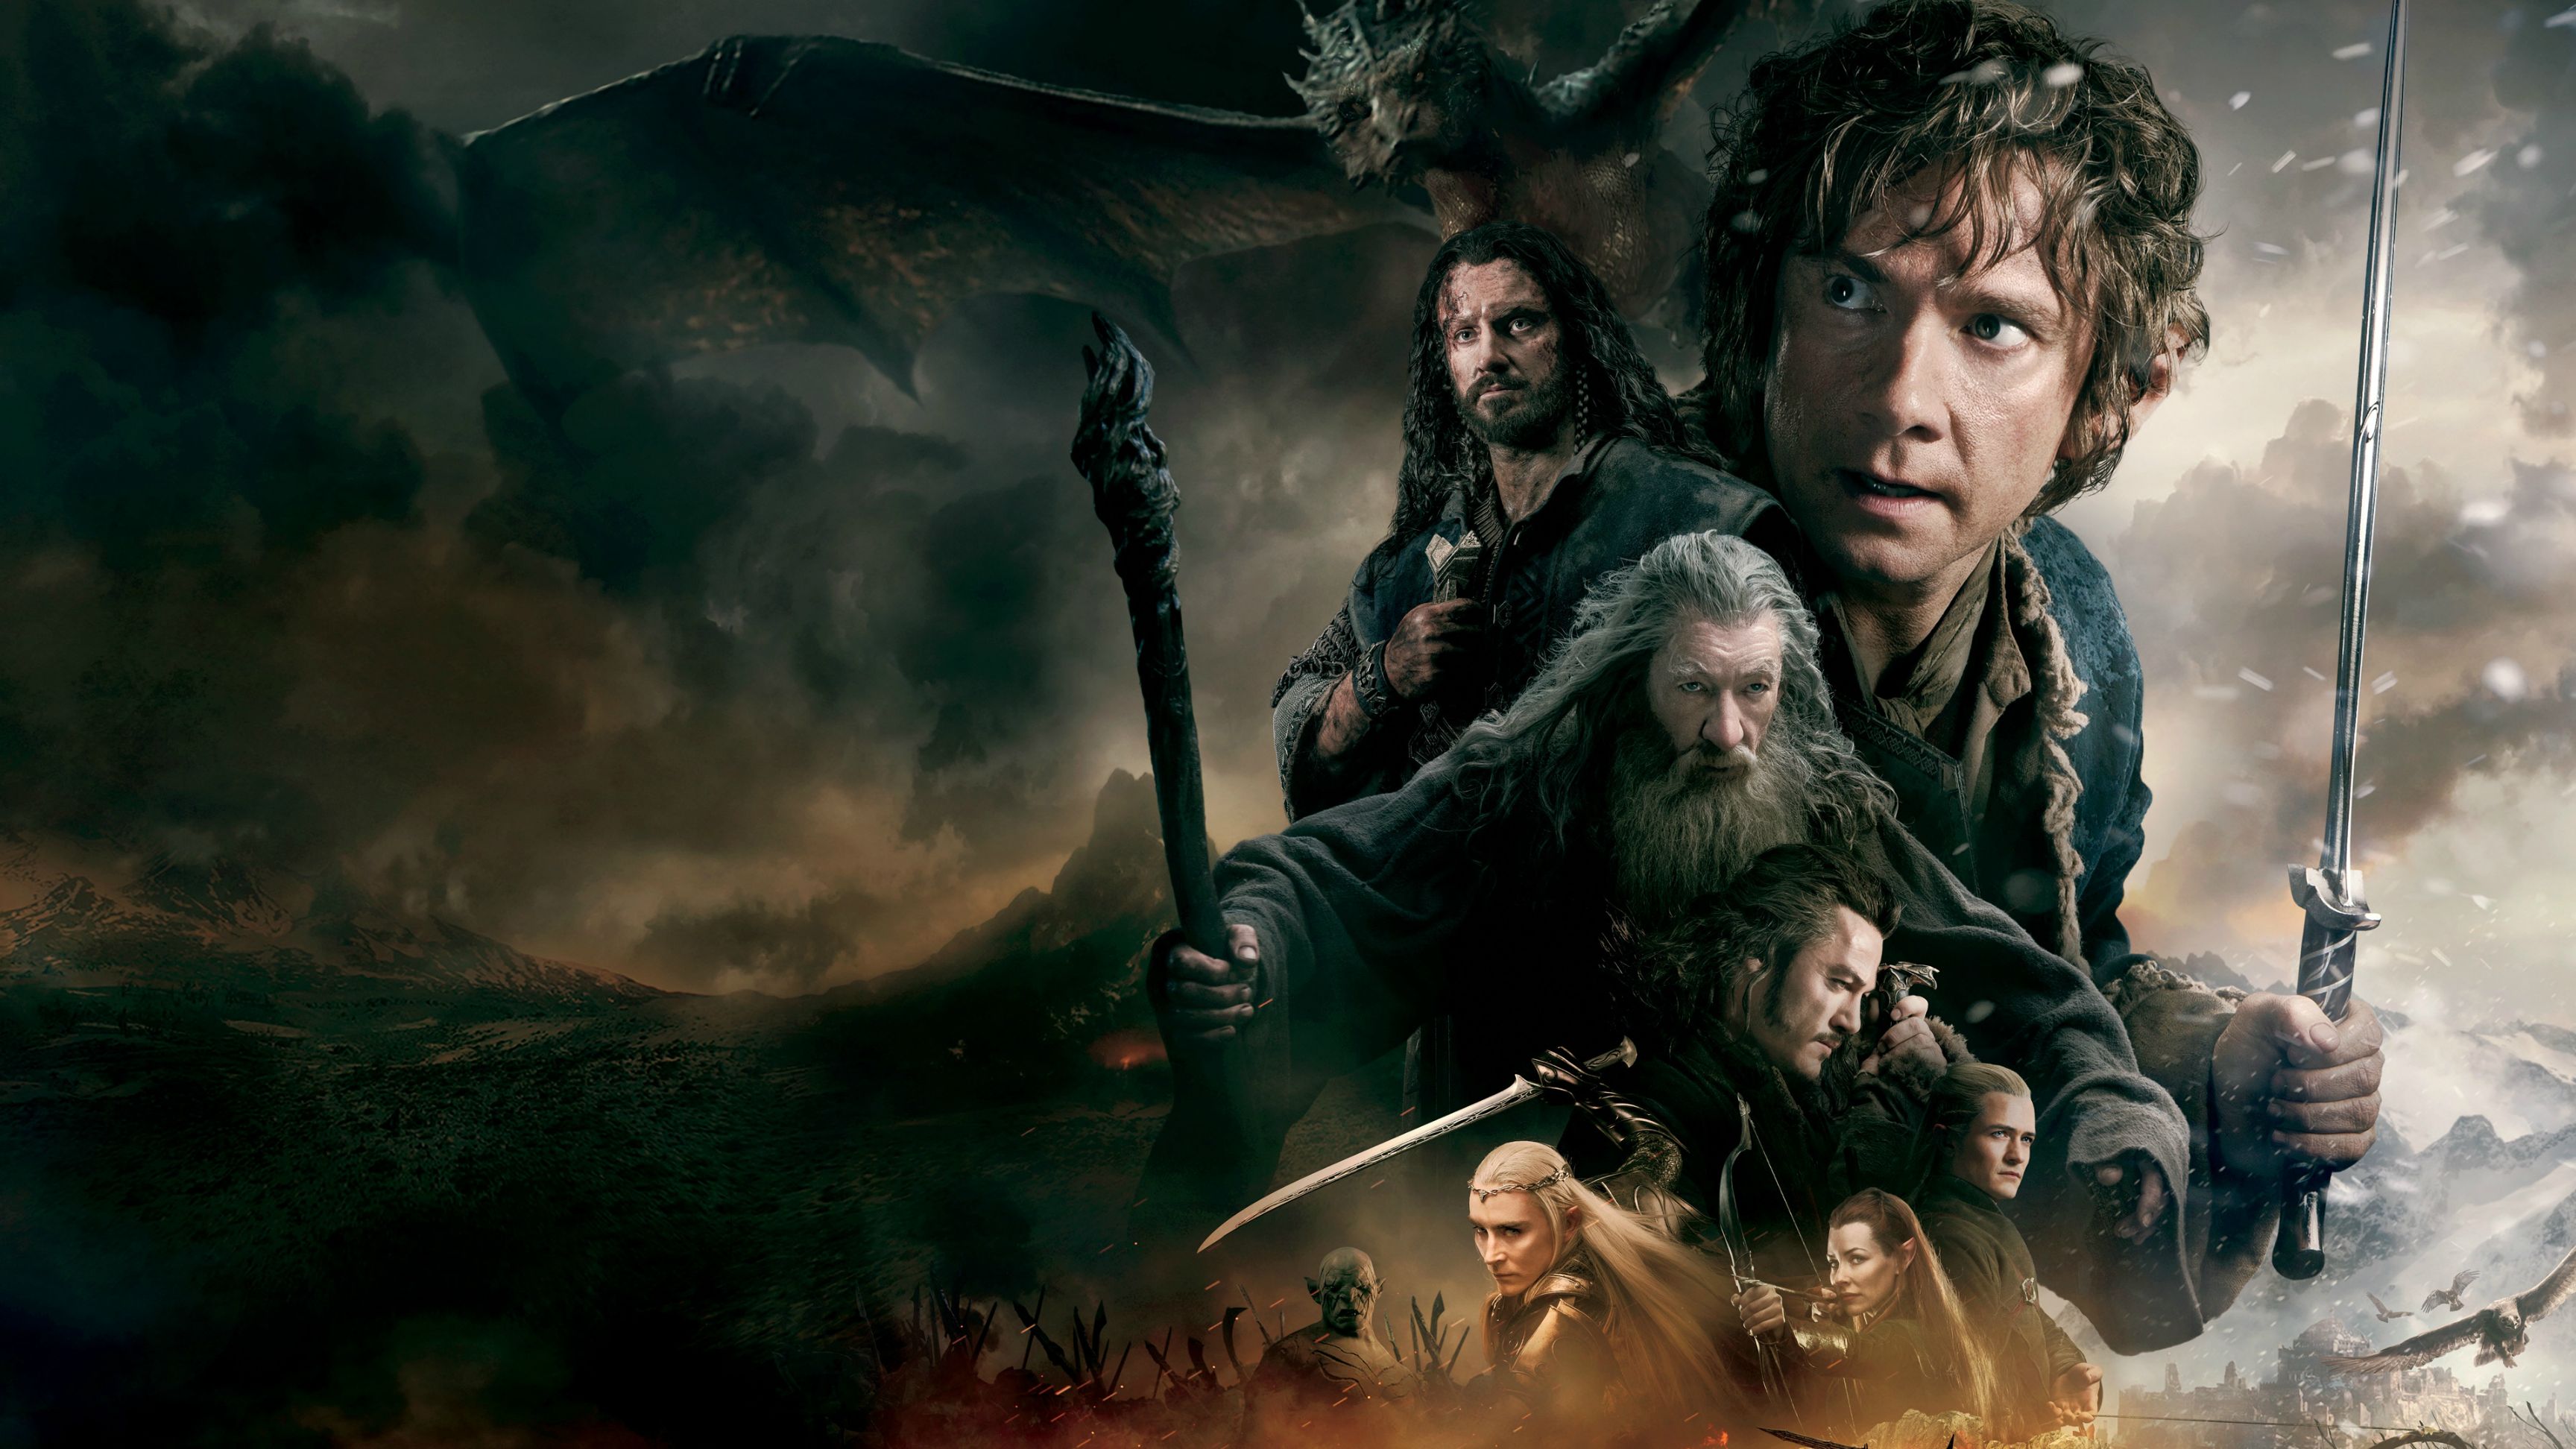 The Hobbit The Desolation of Smaug Wallpaper by 1love1jesus on DeviantArt